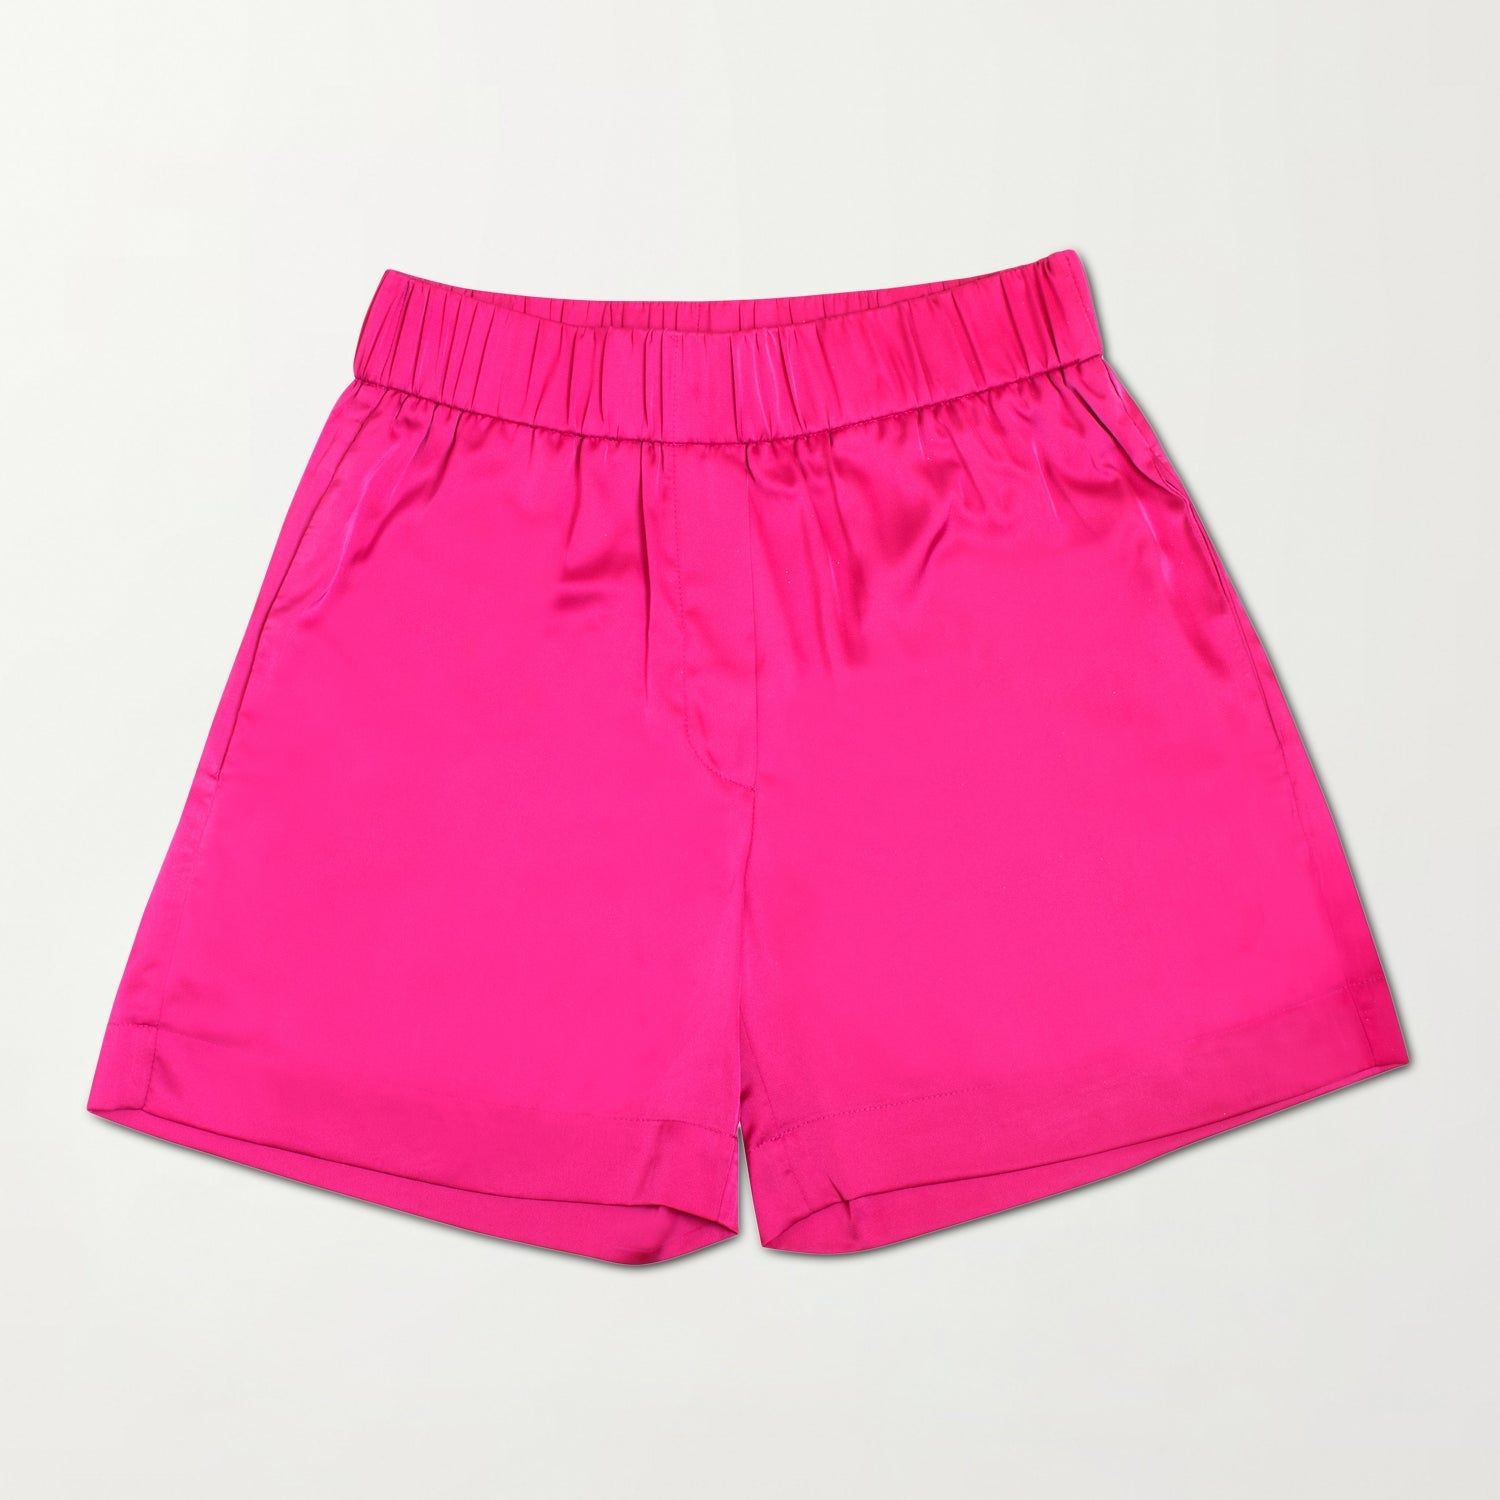 Picture of The Shorts in Fuchsia